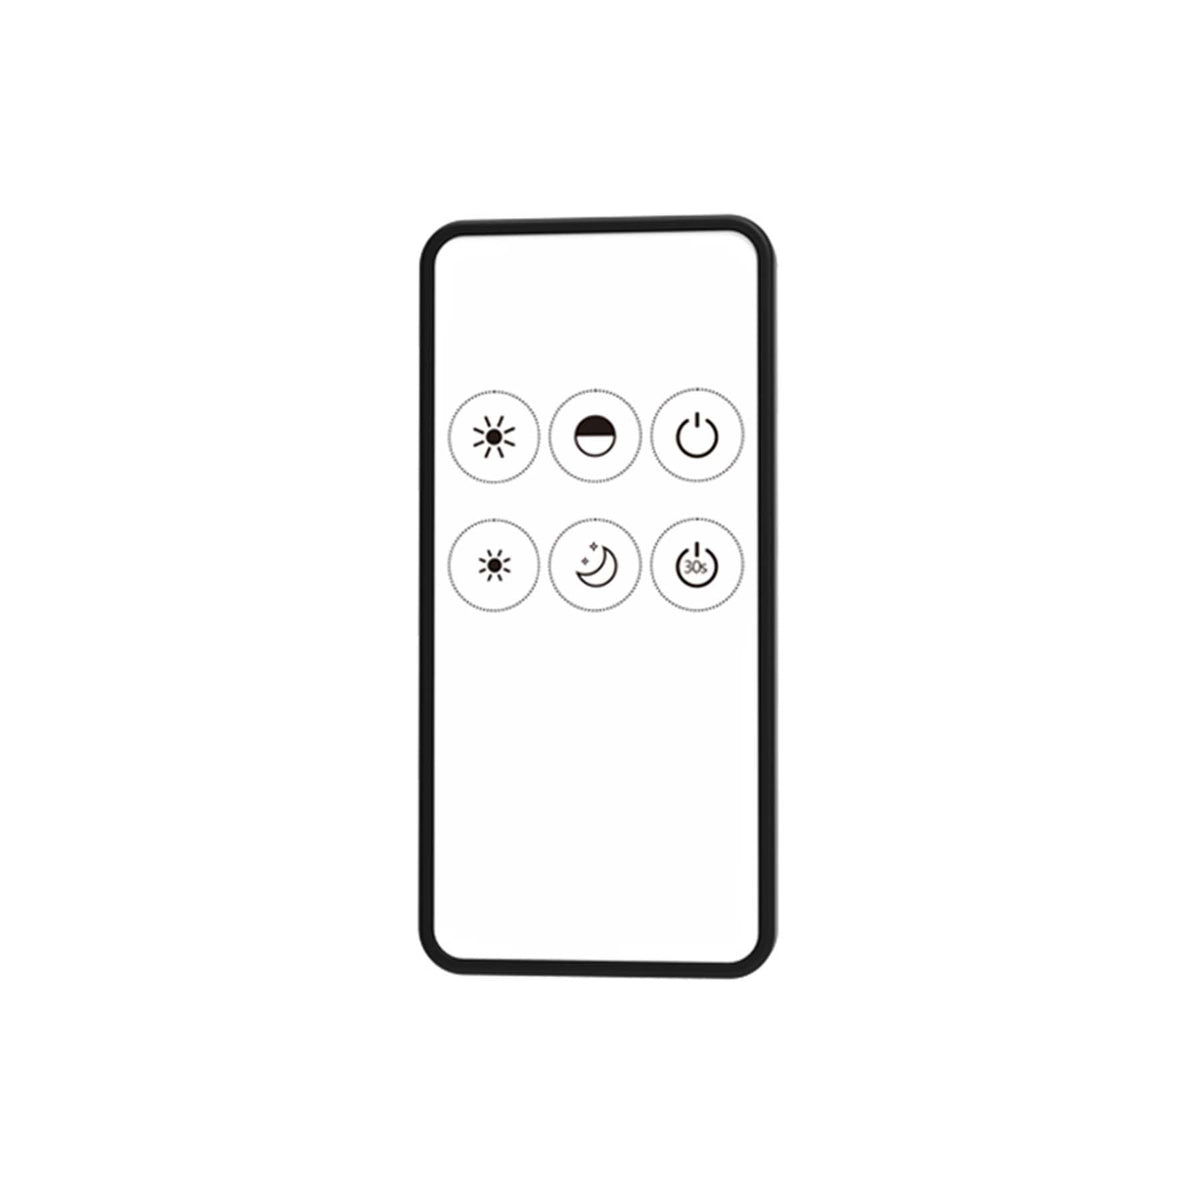 G.W.S. LED 1 Zone Dimming RF Remote Control RM1